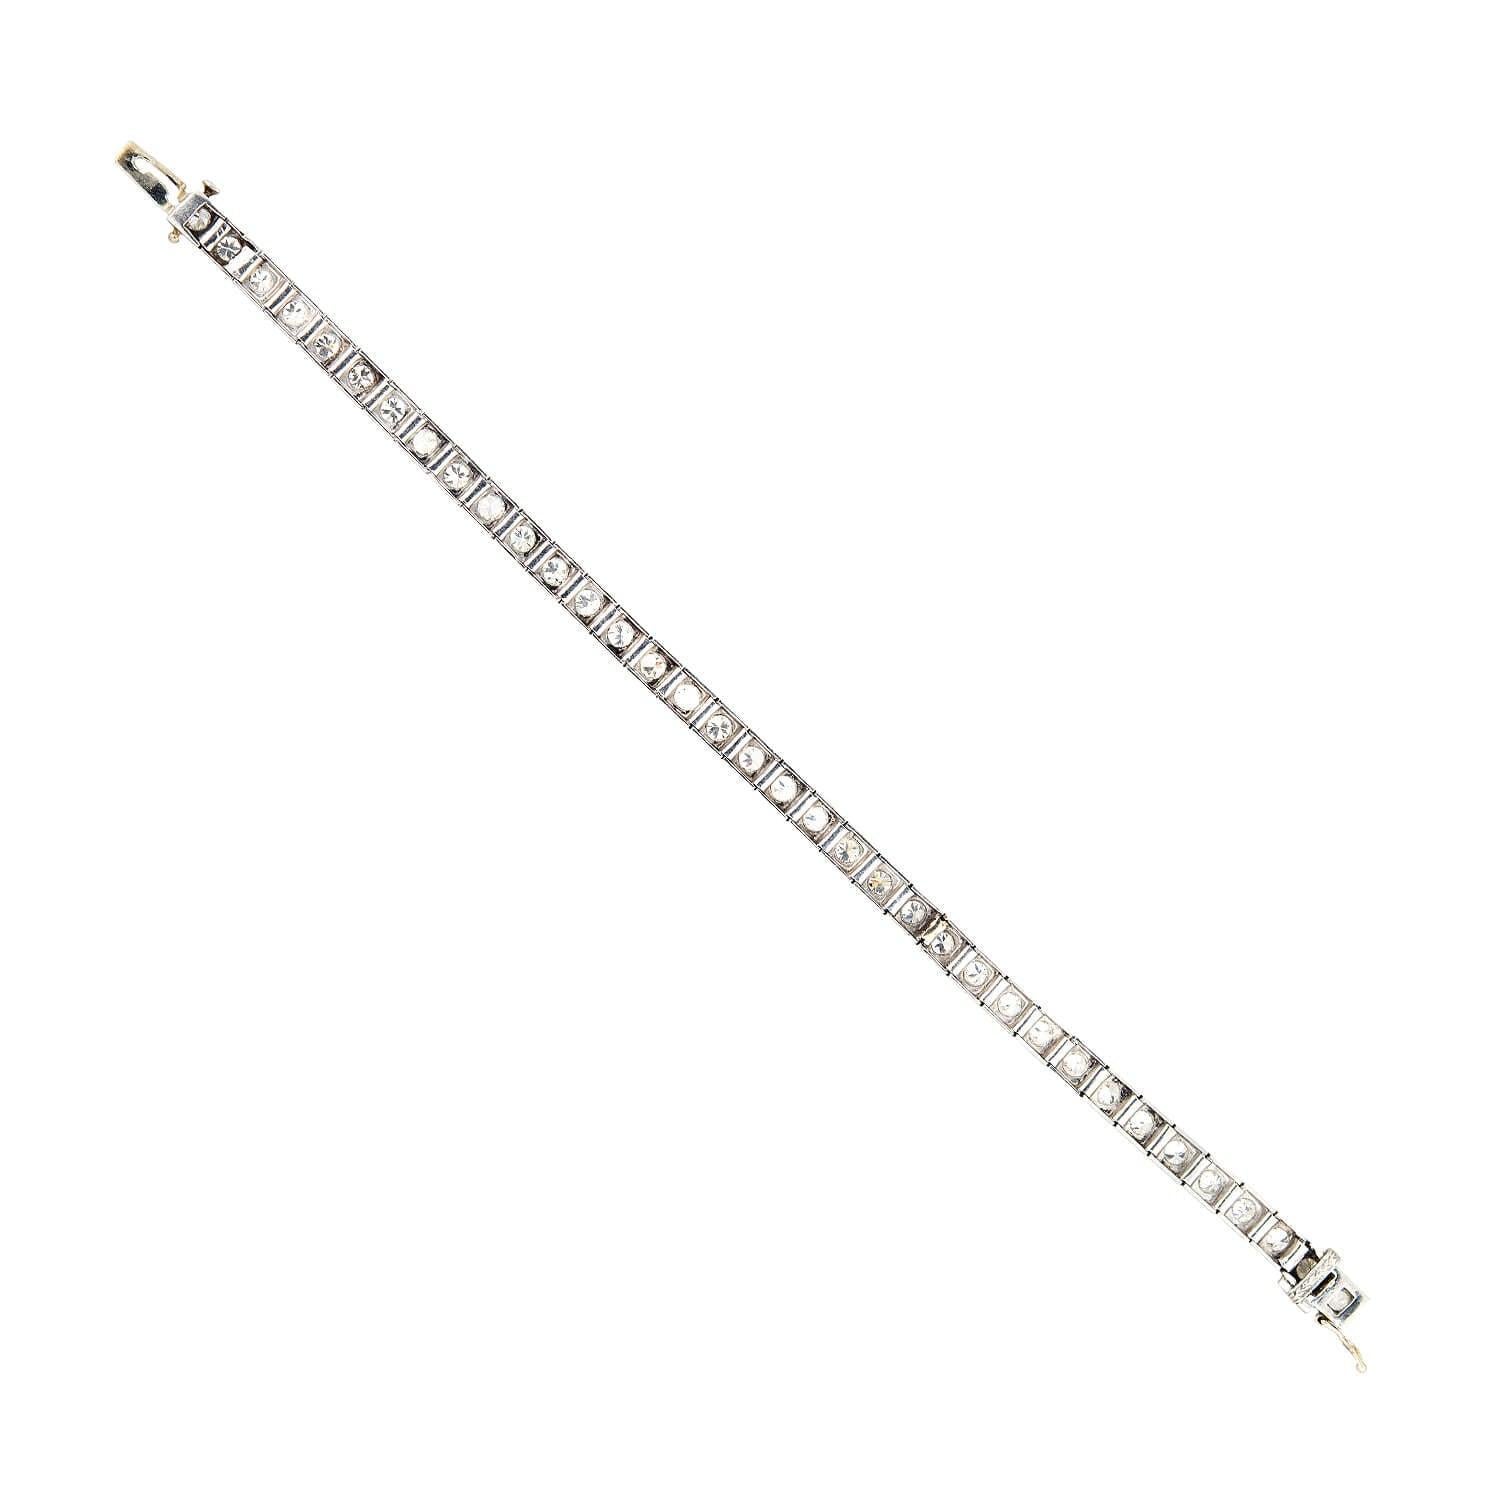 An incredible diamond line bracelet from the Art Deco (ca1920s) era! Crafted in platinum, this gorgeous piece is comprised of 36 total links, each adorned with a glittering Old European Cut diamond. The sparkling diamonds are prong-set within